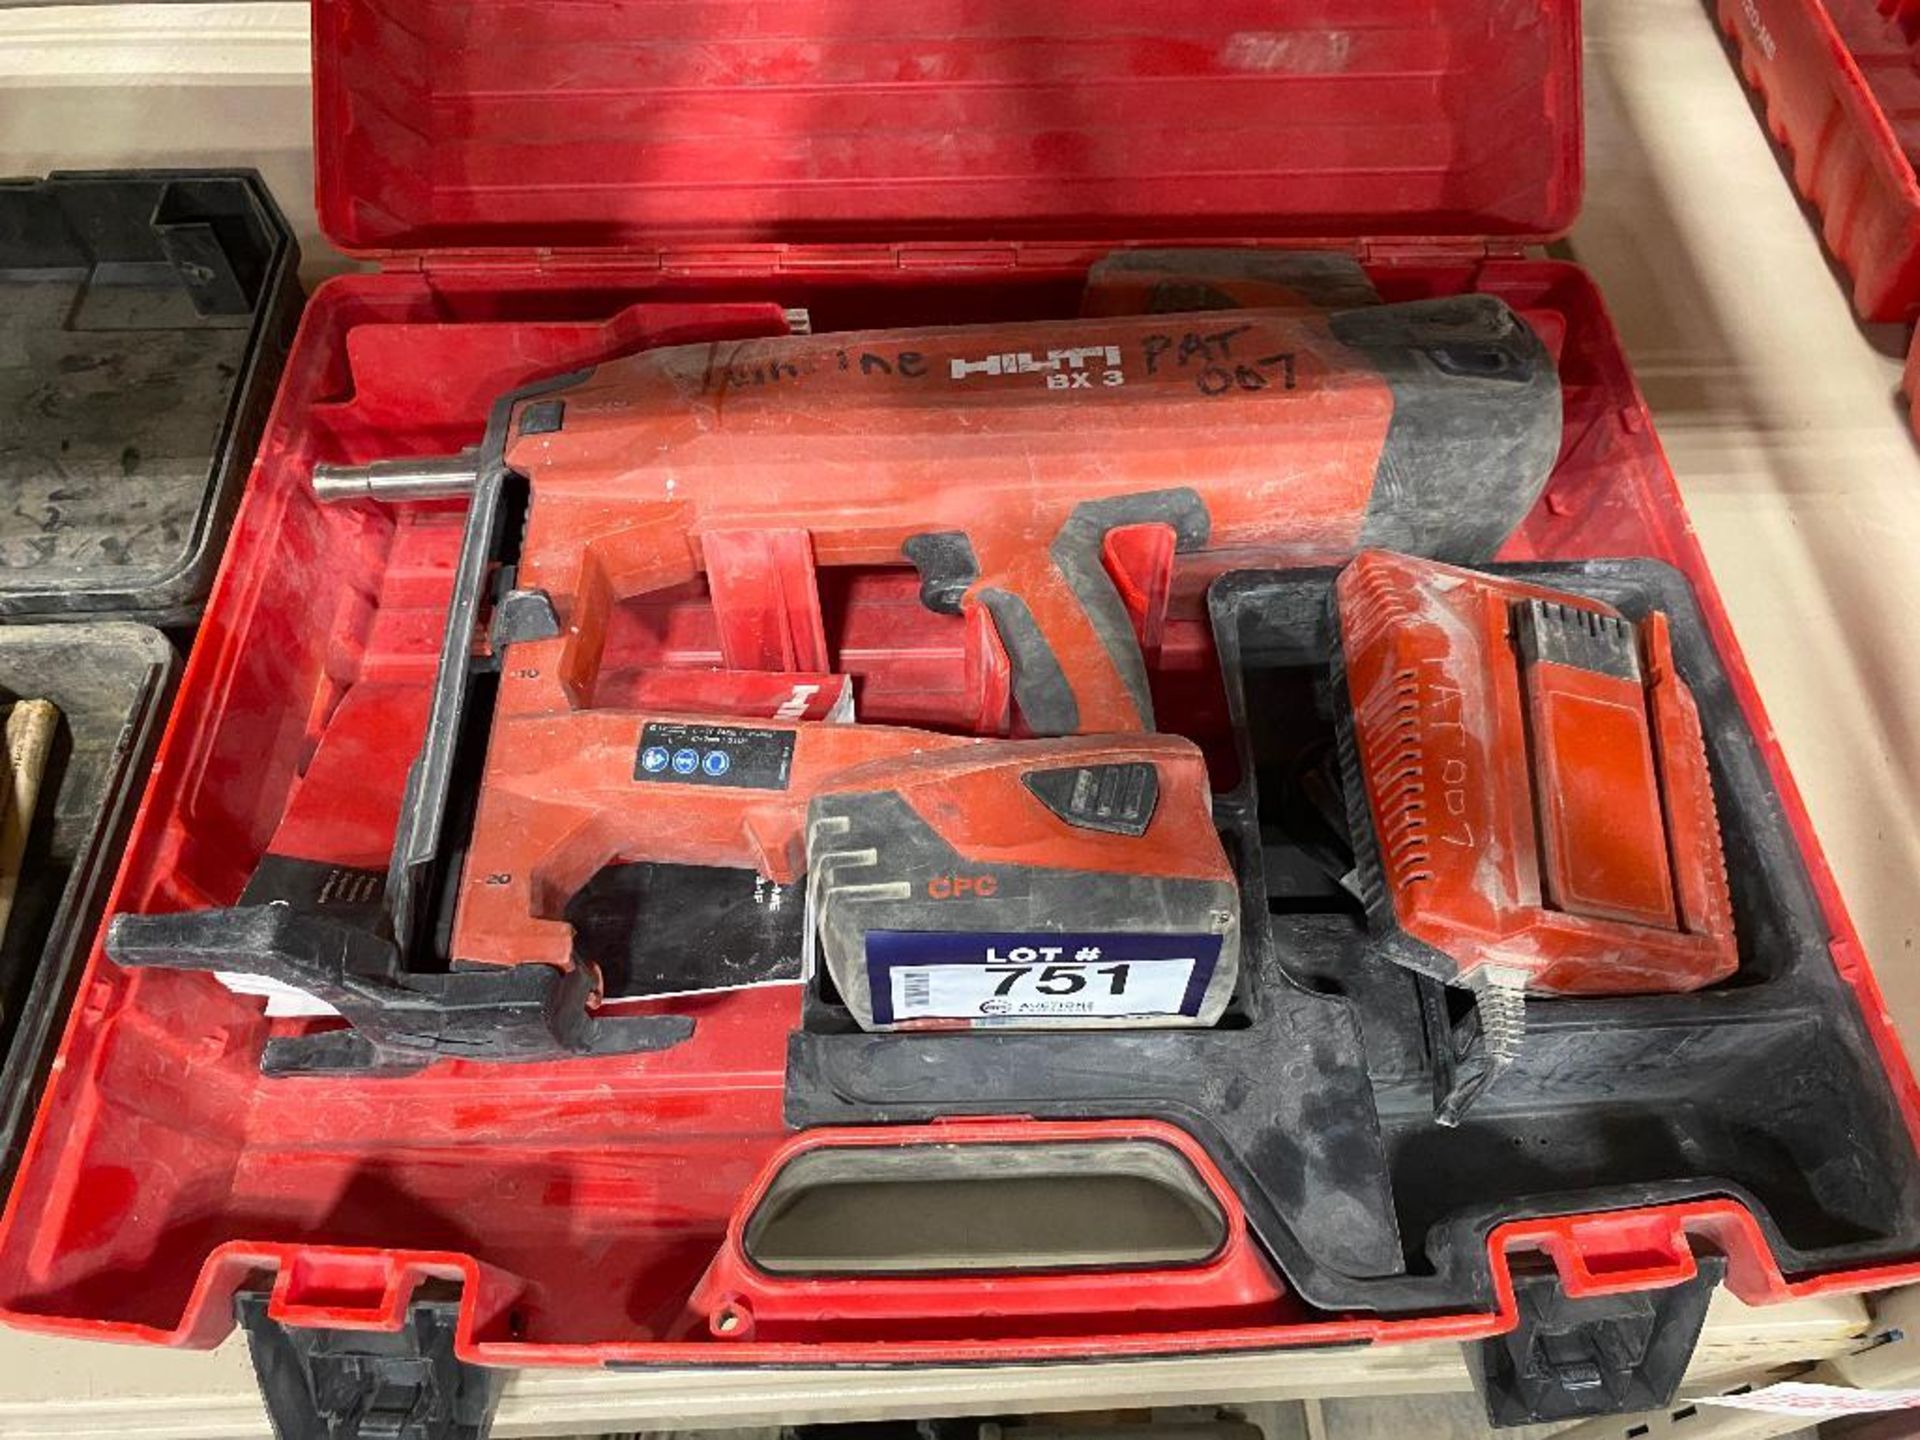 Hilti BX3 ME Cordless Fastening Tool w/ Battery, Charger, etc.